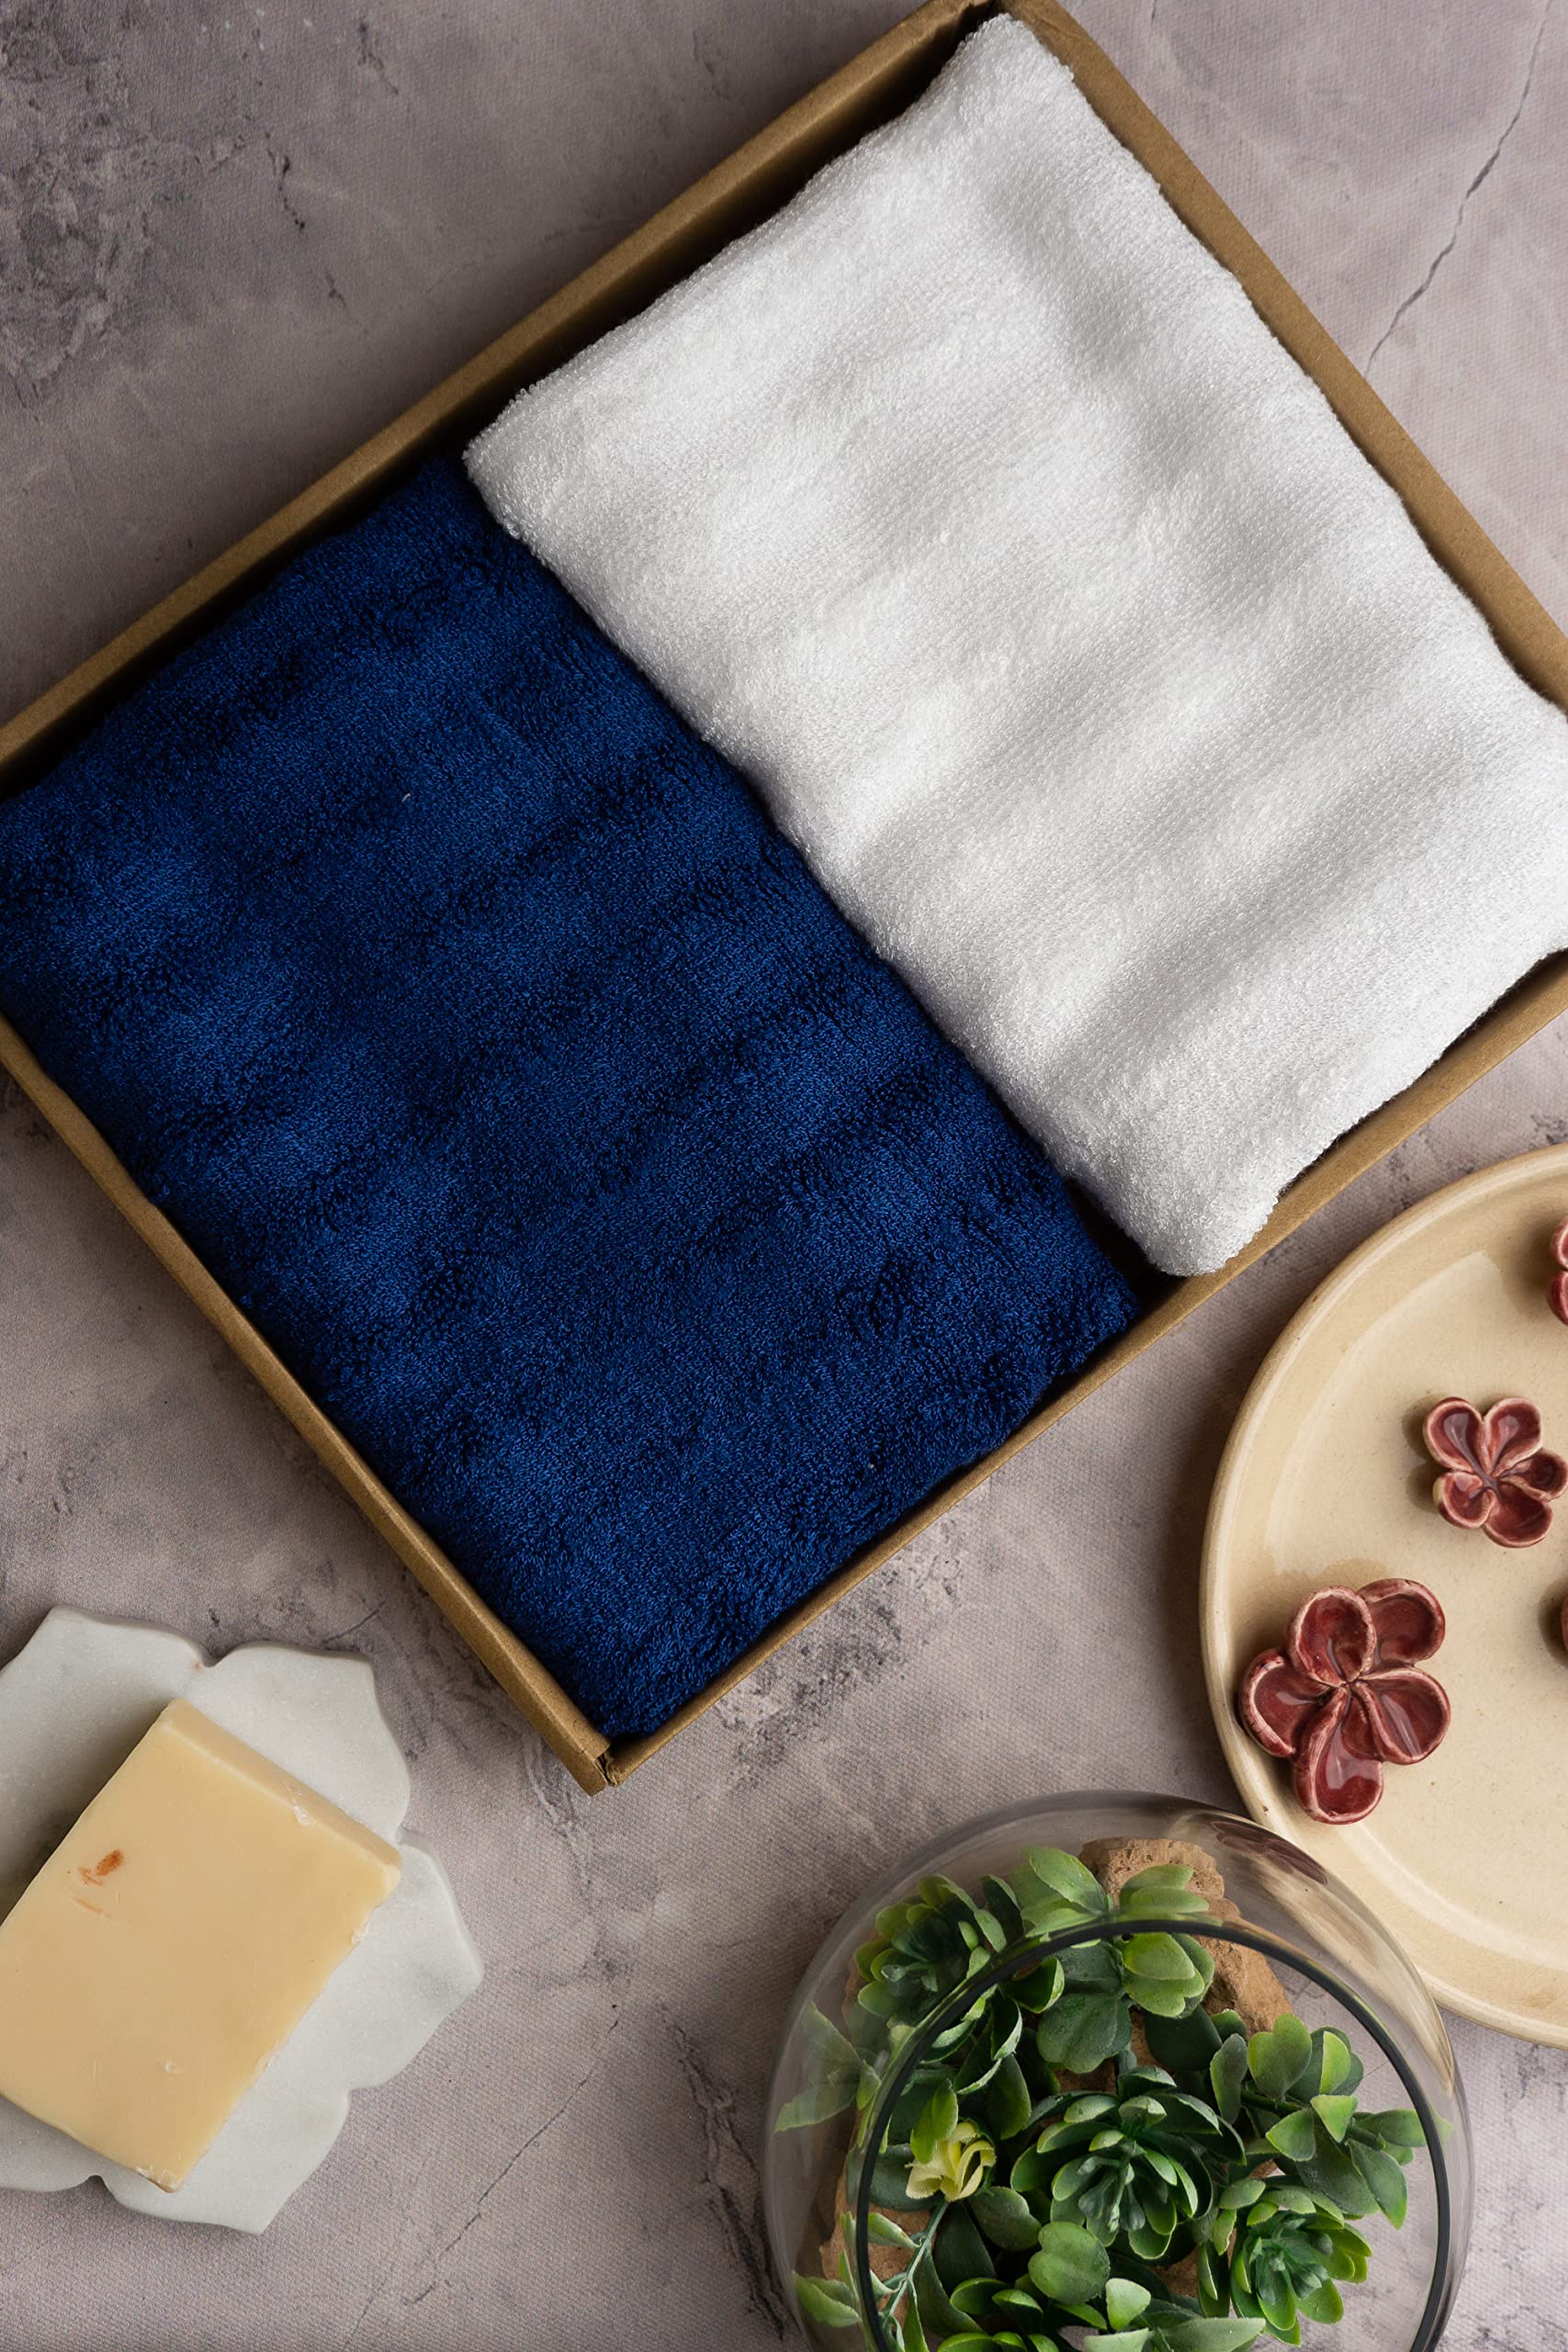 Mush Bamboo Hand Towels Set of 2 | 100% Bamboo | Ultra Soft, Absorbent & Quick Dry Towel for Daily use. Gym, Pool, Travel, Sports and Yoga | 75 X 35 cms | 600 GSM (Navy Blue & White)